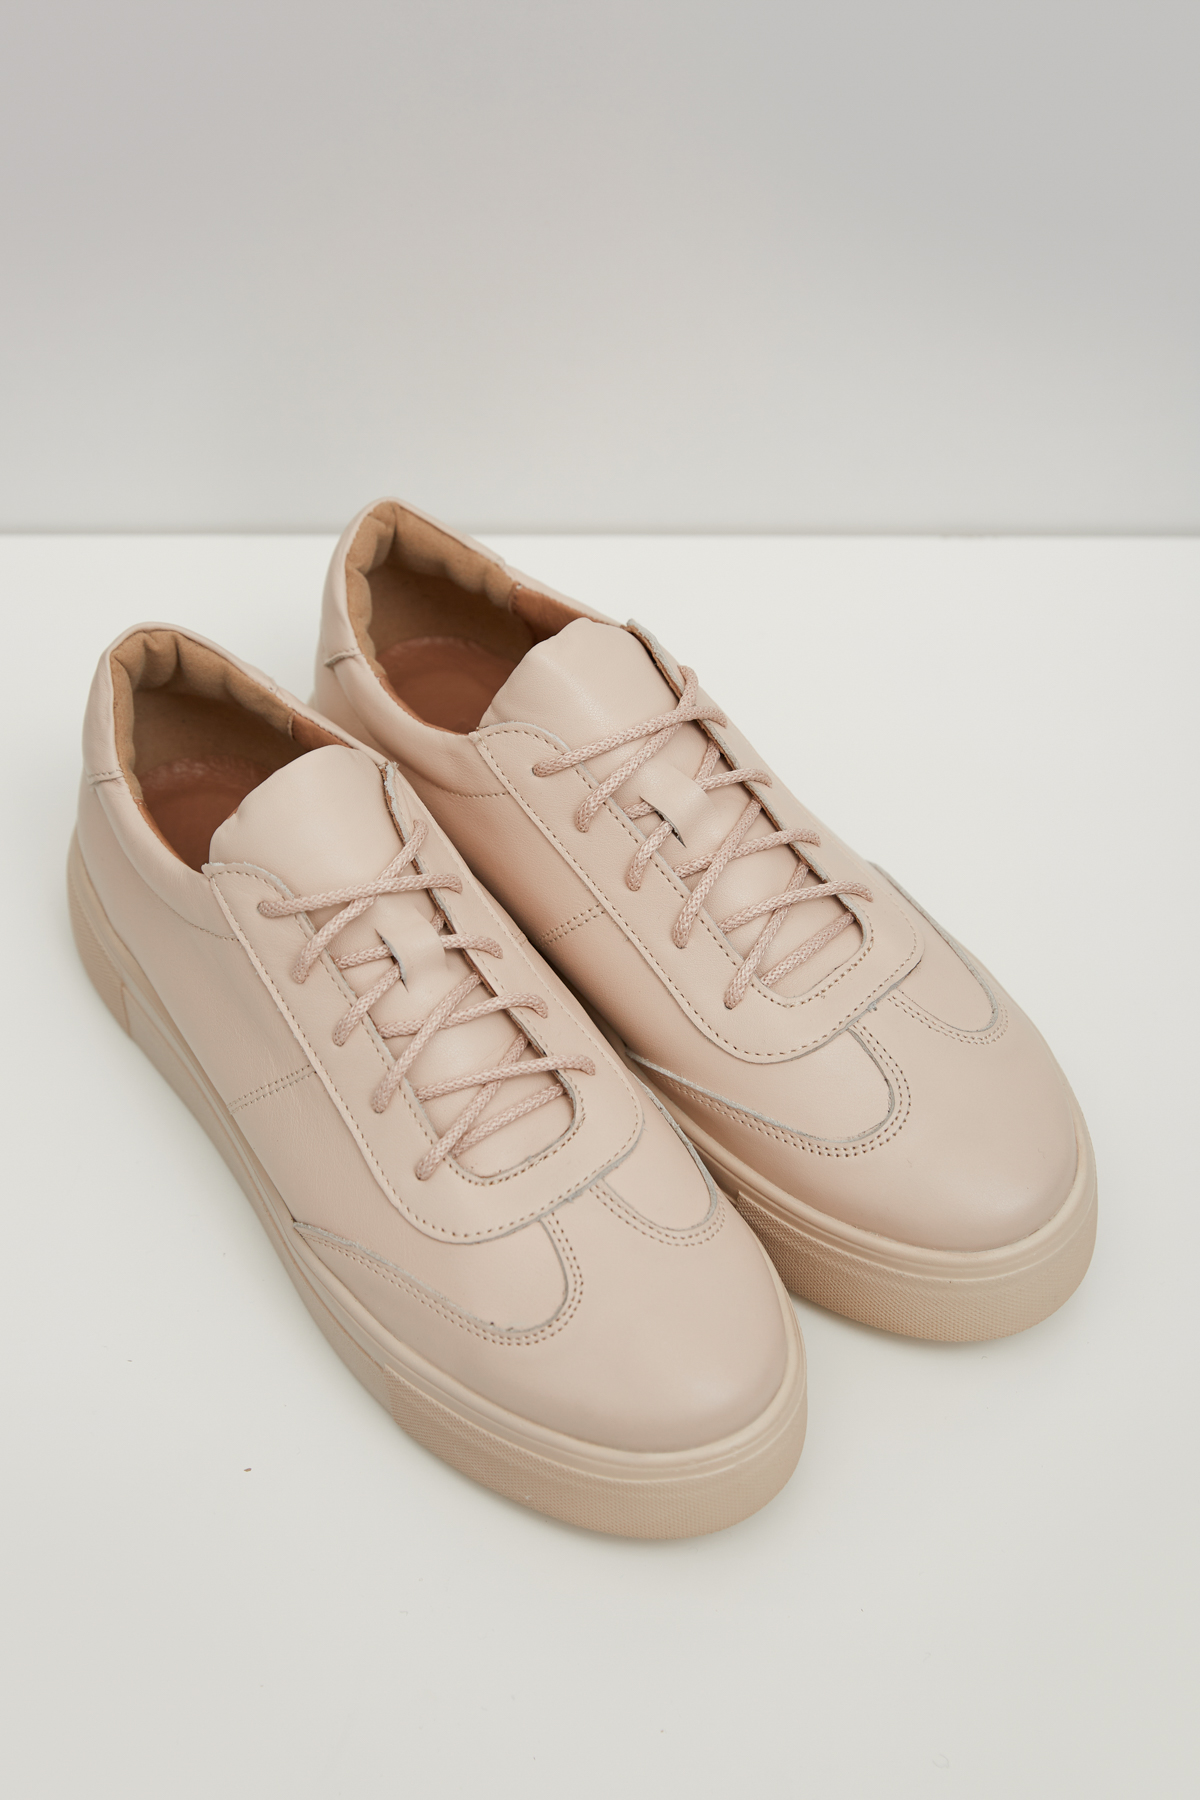 Beige leather sneakers with thick soles, photo 3